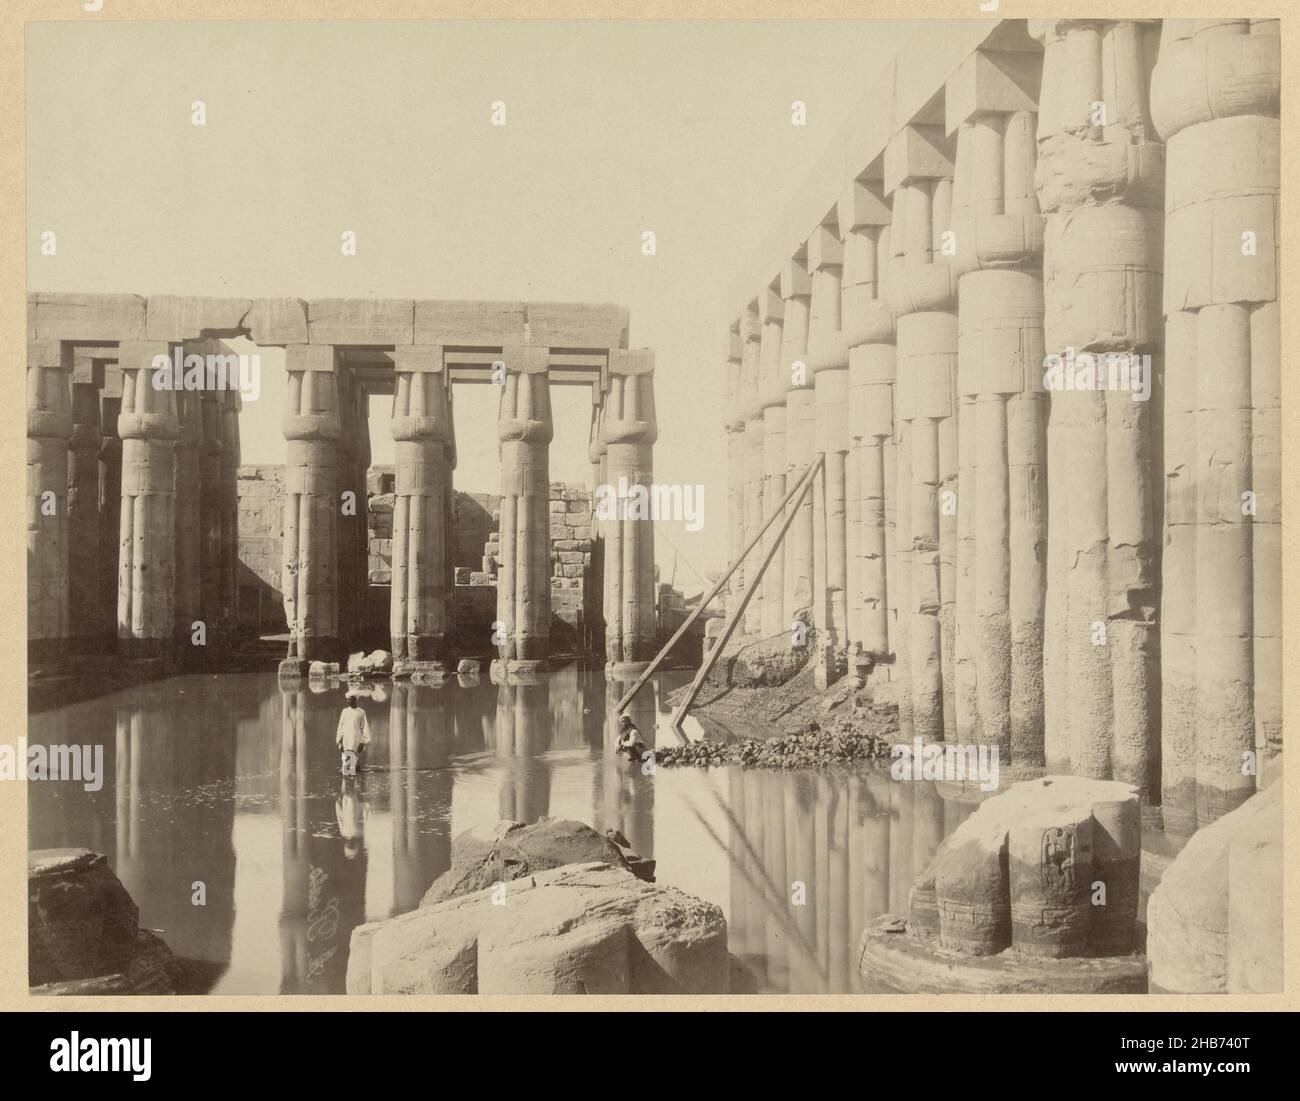 The temple complex of Luxor partially submerged by high water level of the Nile.E 75. Temple of Luxor at high water level of the Nile. Upper Egypt. (title on object), The photograph is part of the series of photographs from Egypt collected by Richard Polak., Antonio Beato (mentioned on object), Egypte, c. 1895 - c. 1915, photographic support, paper, albumen print, height 219 mm × width 278 mmheight 466 mm × width 555 mm Stock Photo